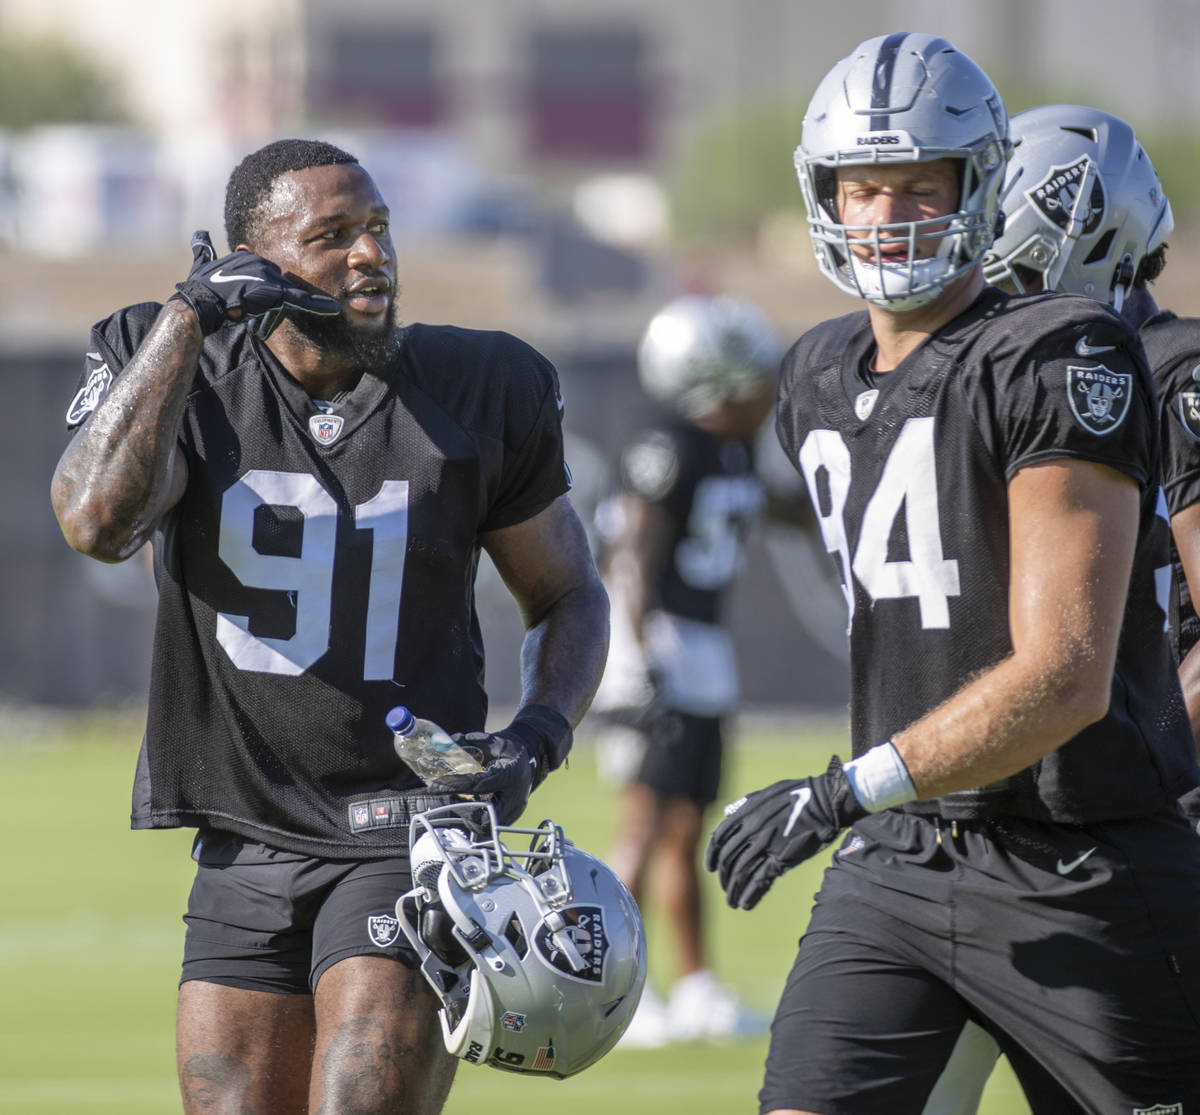 Raiders defensive end Yannick Ngakoue (91) signals a teammate to call him during practice at th ...